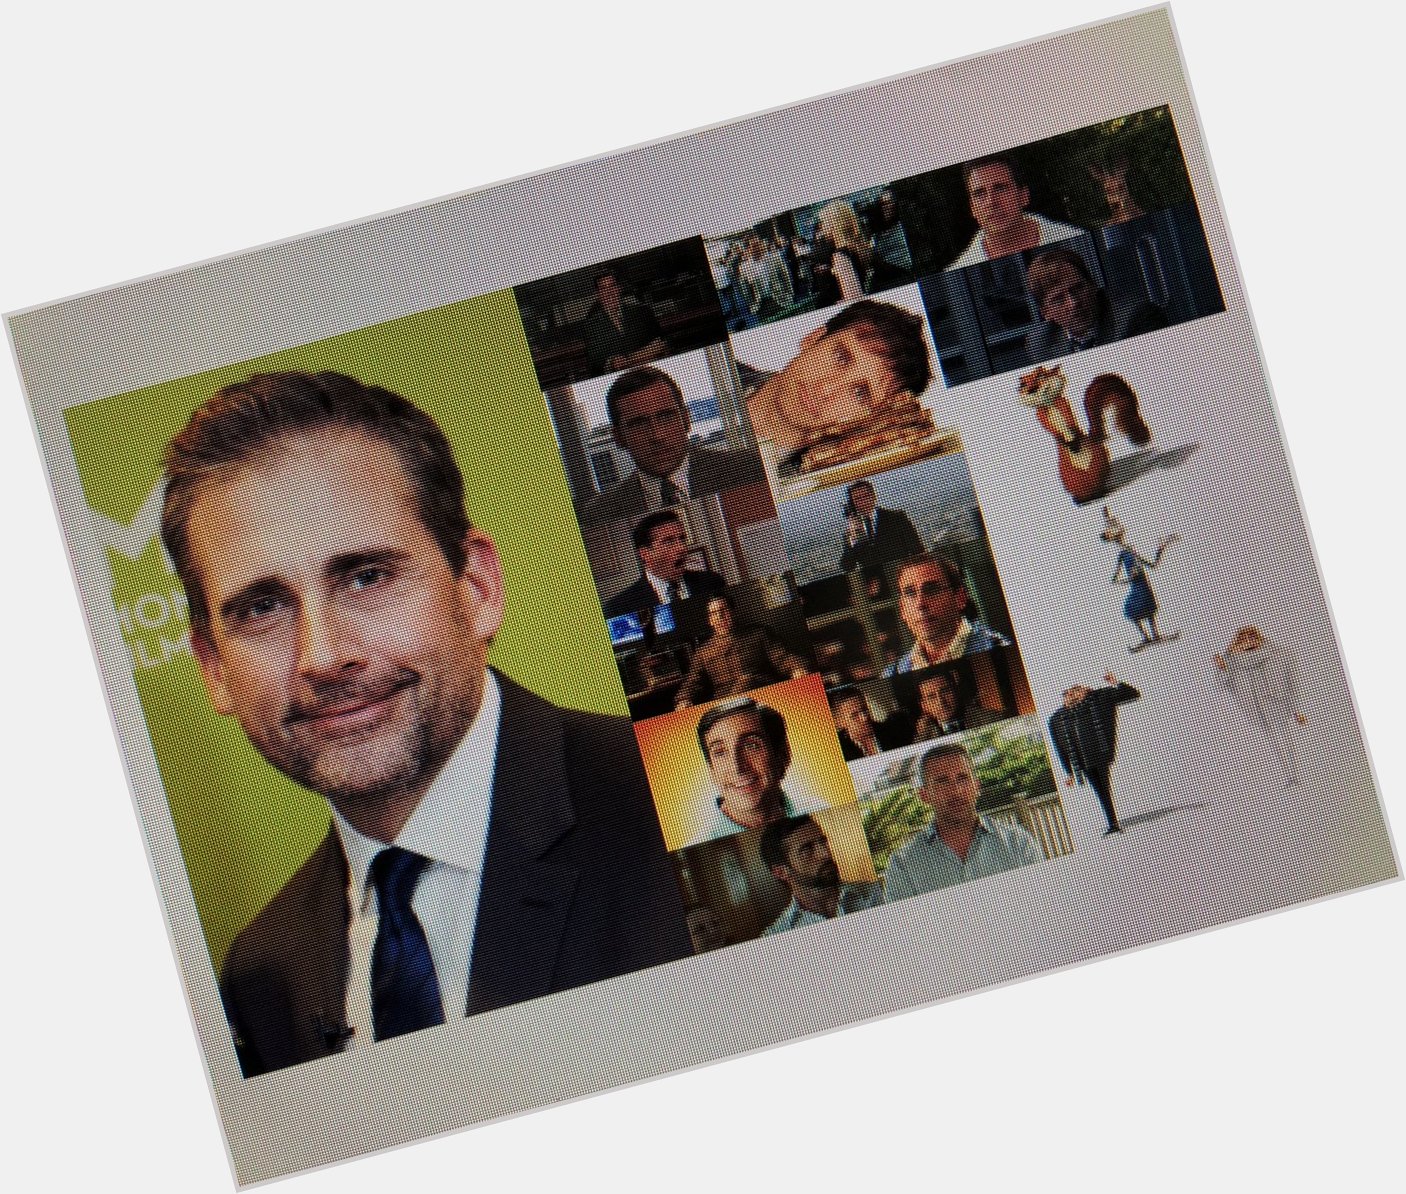 Happy 57th Birthday to actor, comedian, producer, writer, and director, Steve Carell! 